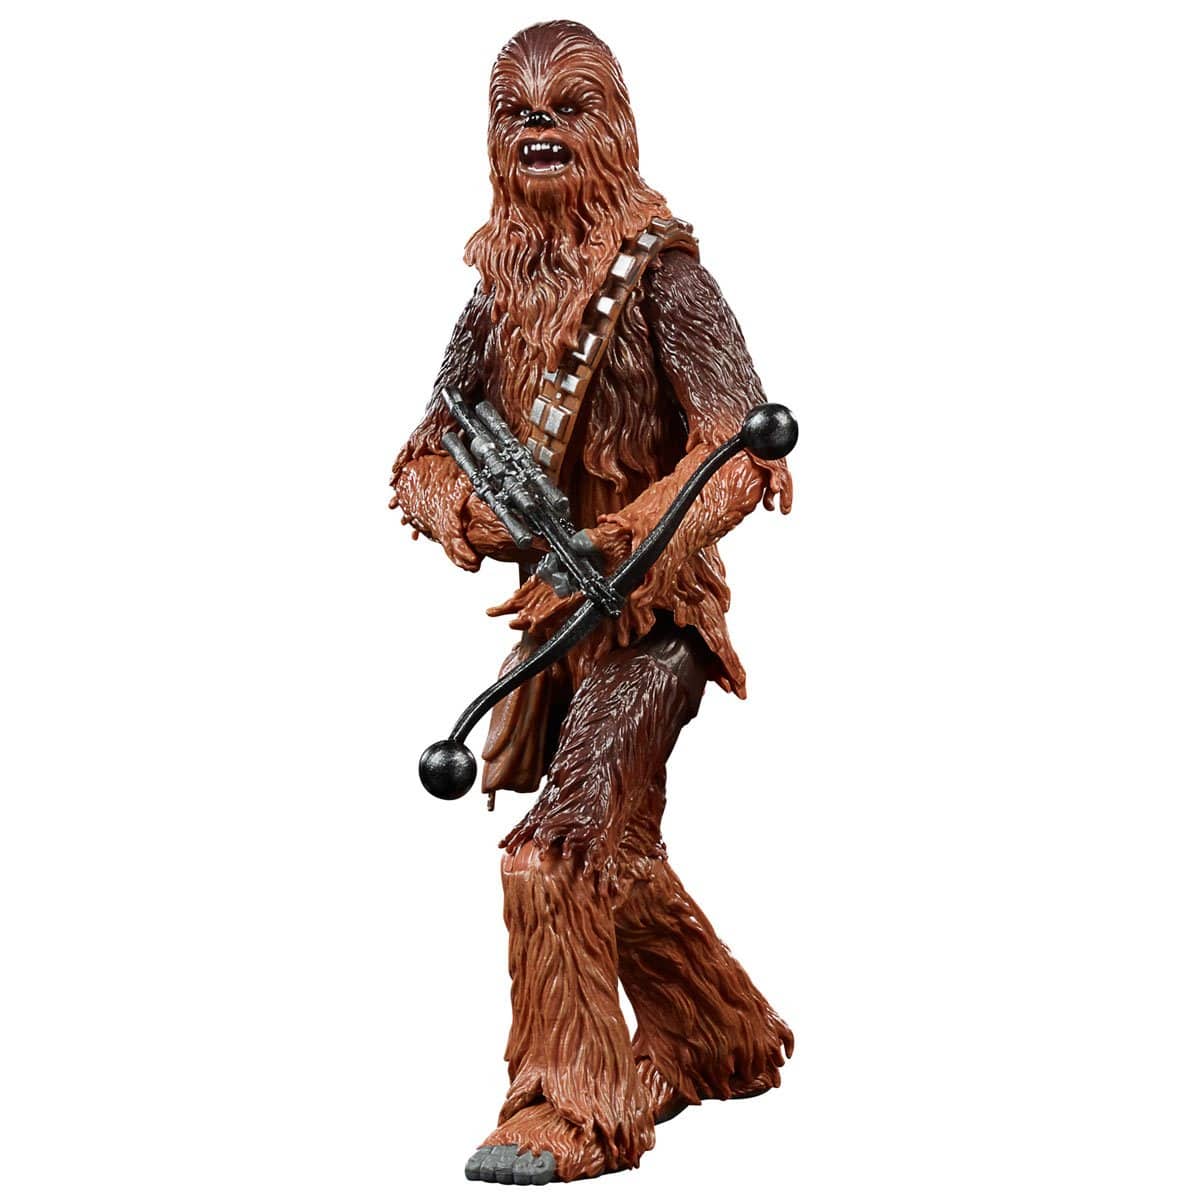 Star Wars The Black Series Archive Chewbacca (The Force Awakens) 6-Inch Action Figure - Pop-O-Loco - Hasbro